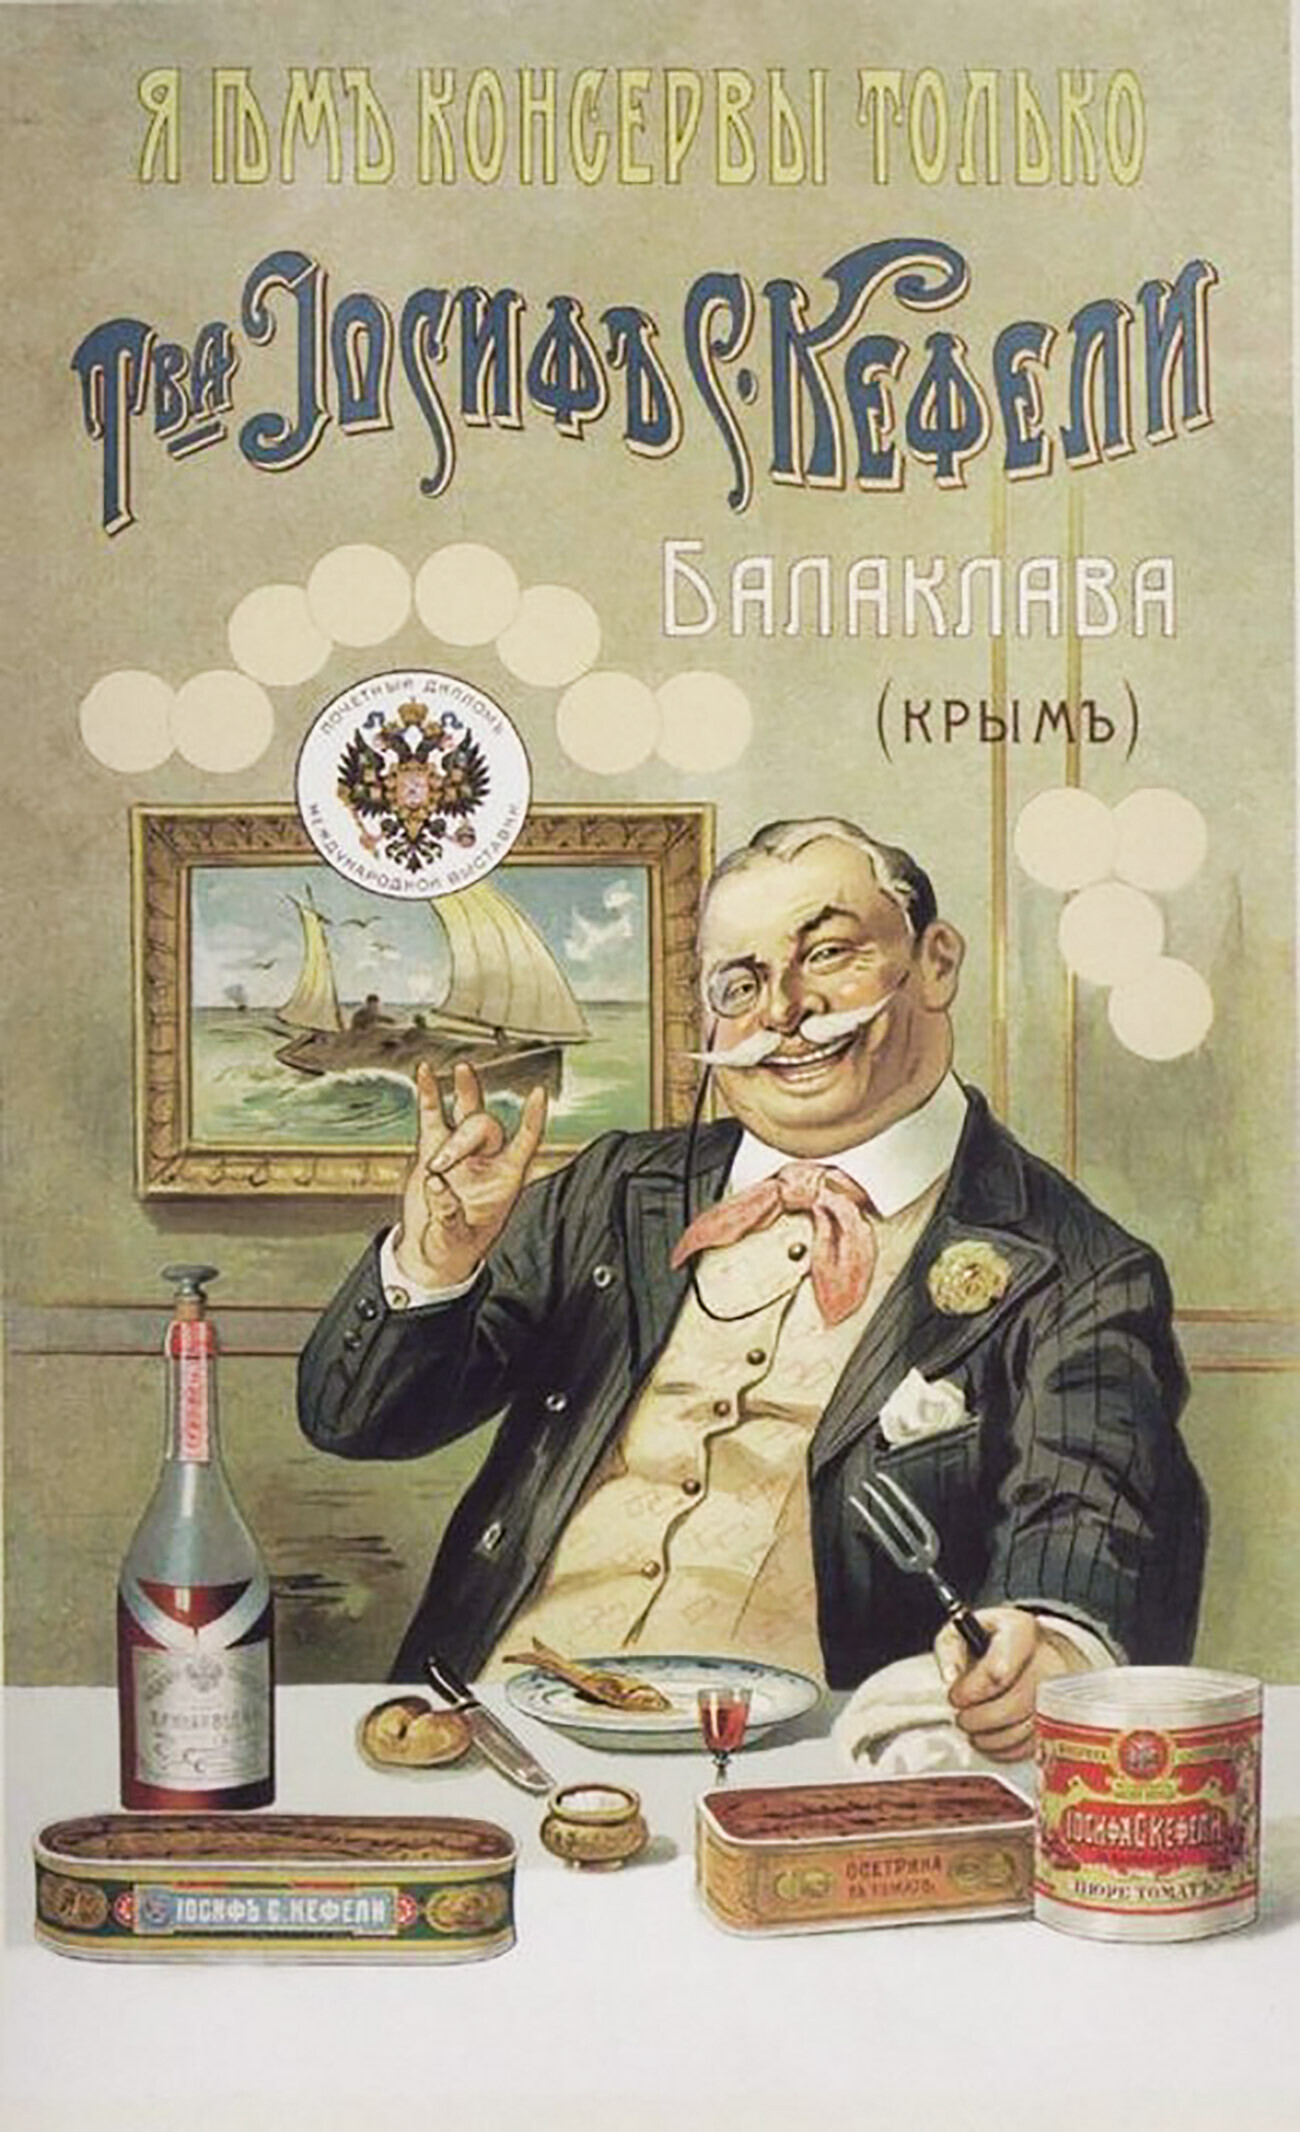 A poster advertising canned food from Joseph Kefeli's cannery.